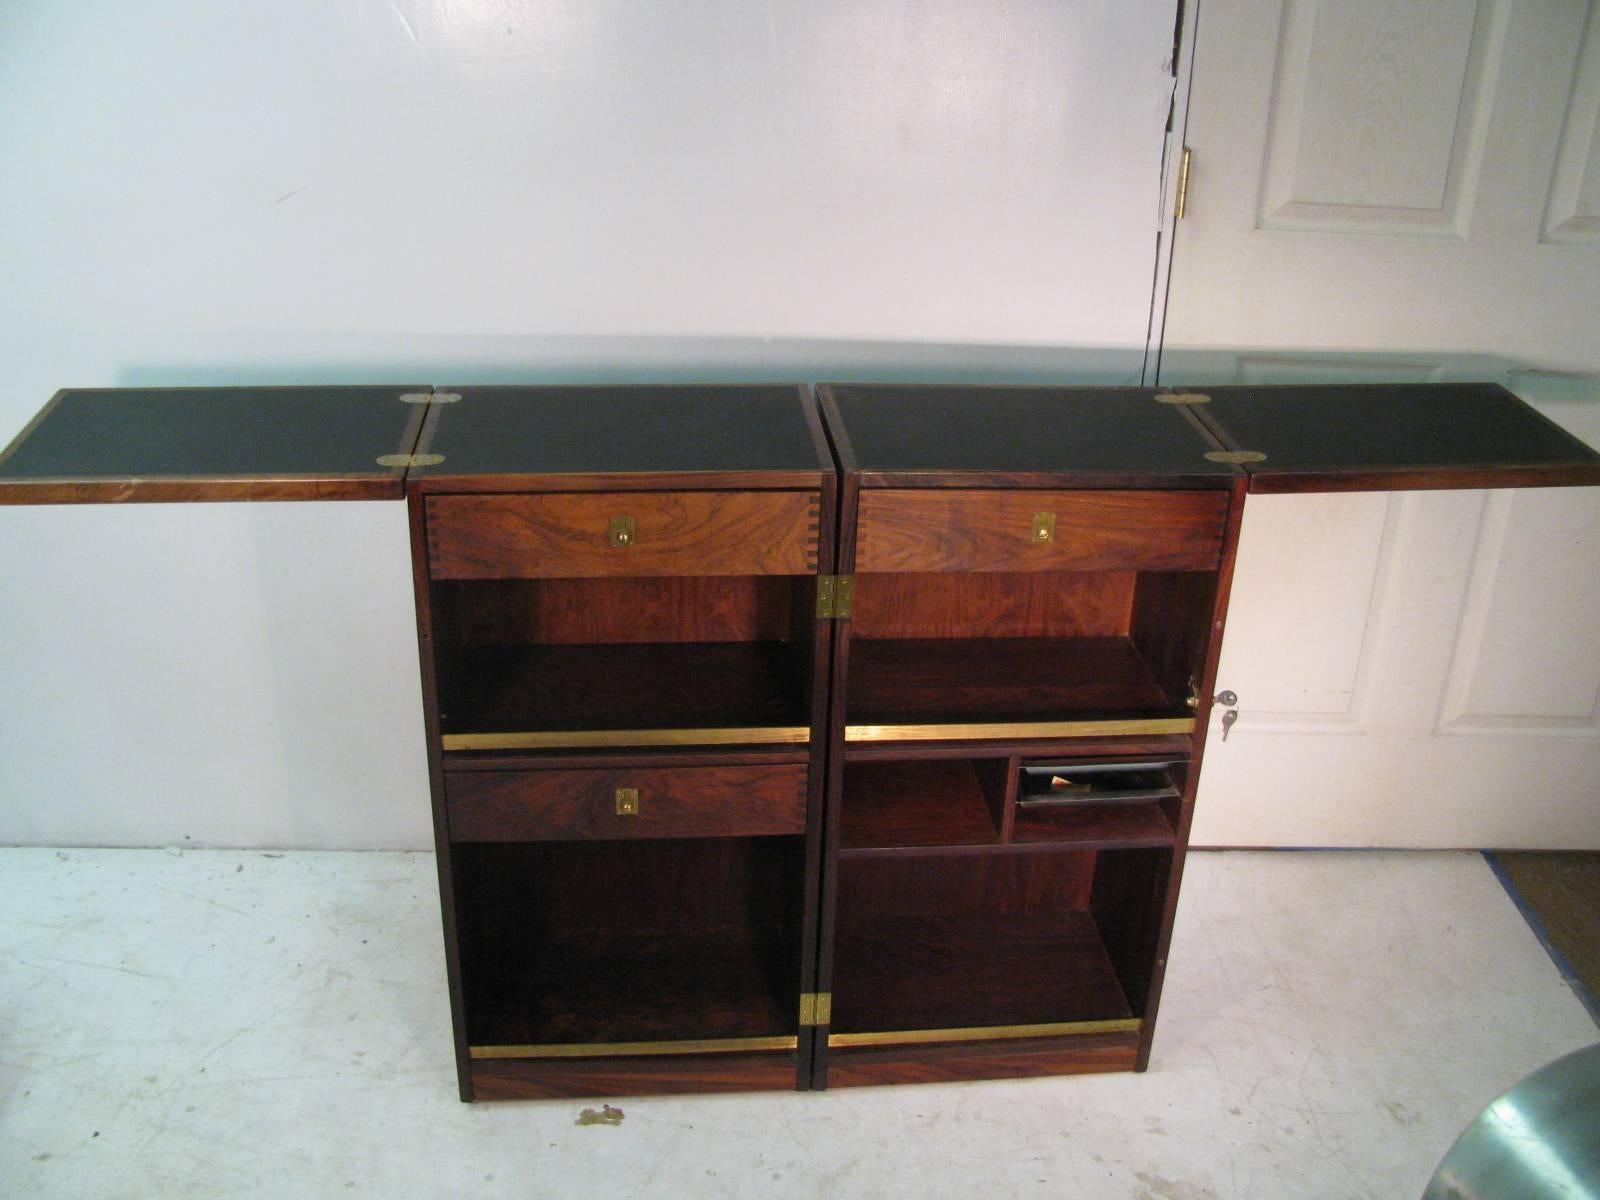 Beautiful, simple and elegant rosewood bar cabinet. Cabinet is well made with dovetailing and has maintained its integrity. Cabinet opens and closes and can be locked to secure goods inside. Has three drawers, 15x 8.25 is the measurement of the